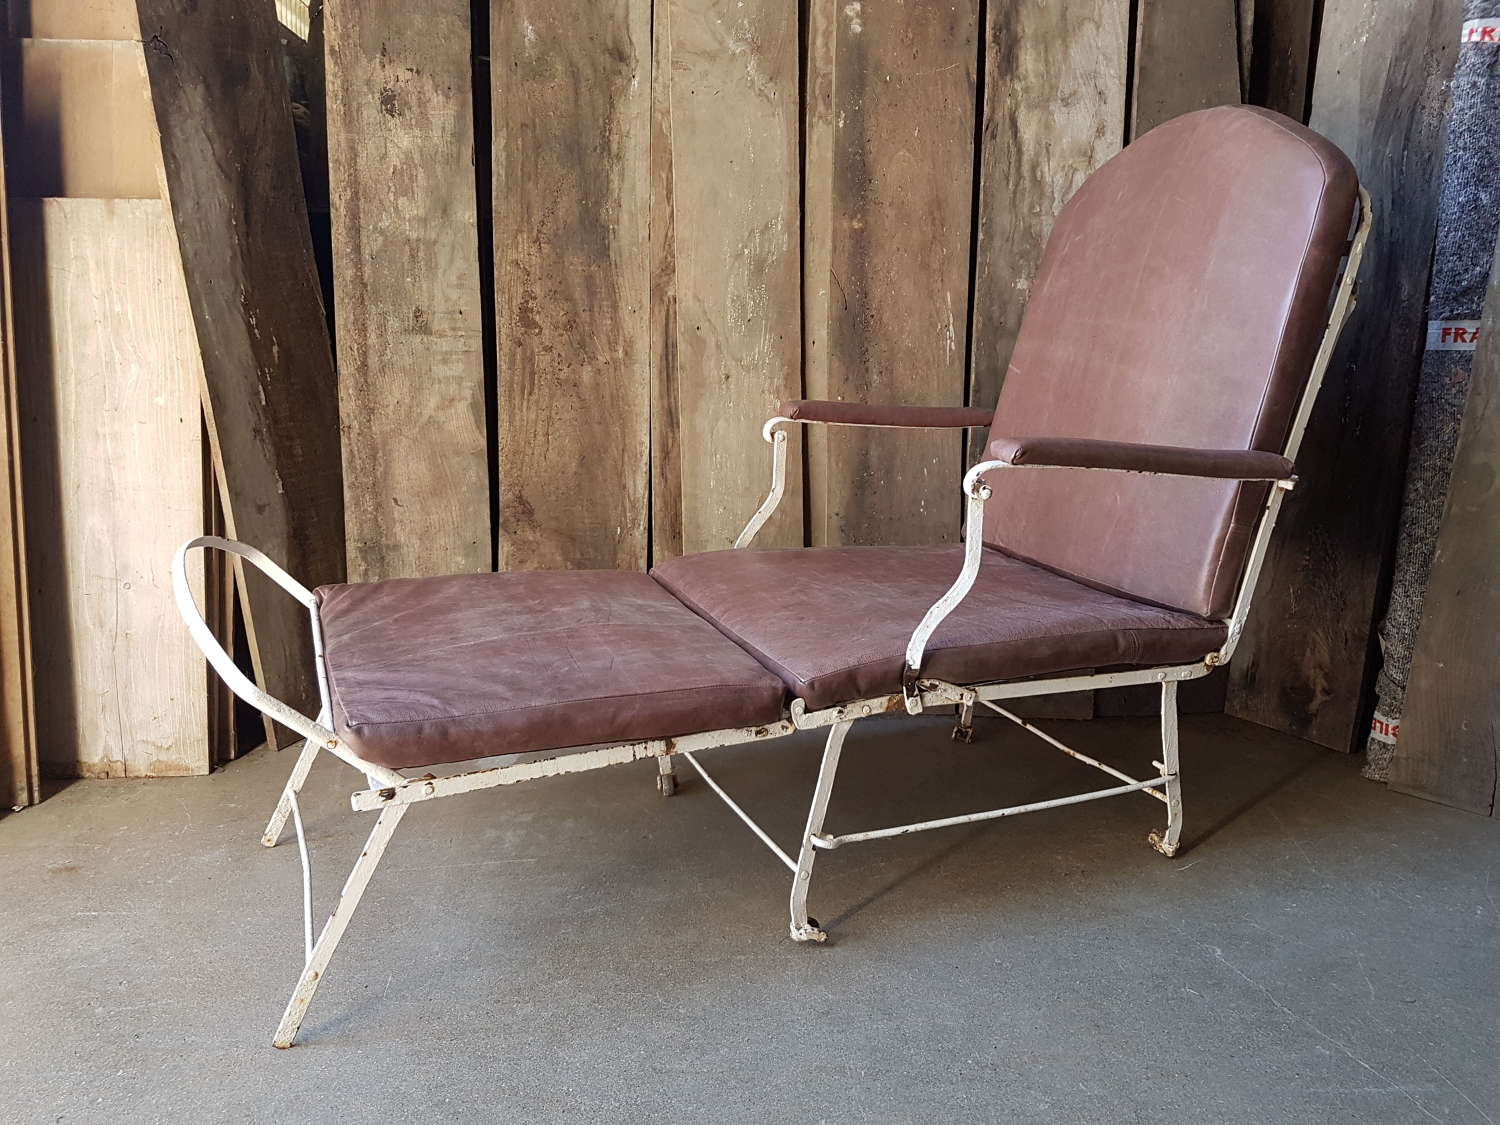 19thC Folding Iron Campaign Chair/Daybed